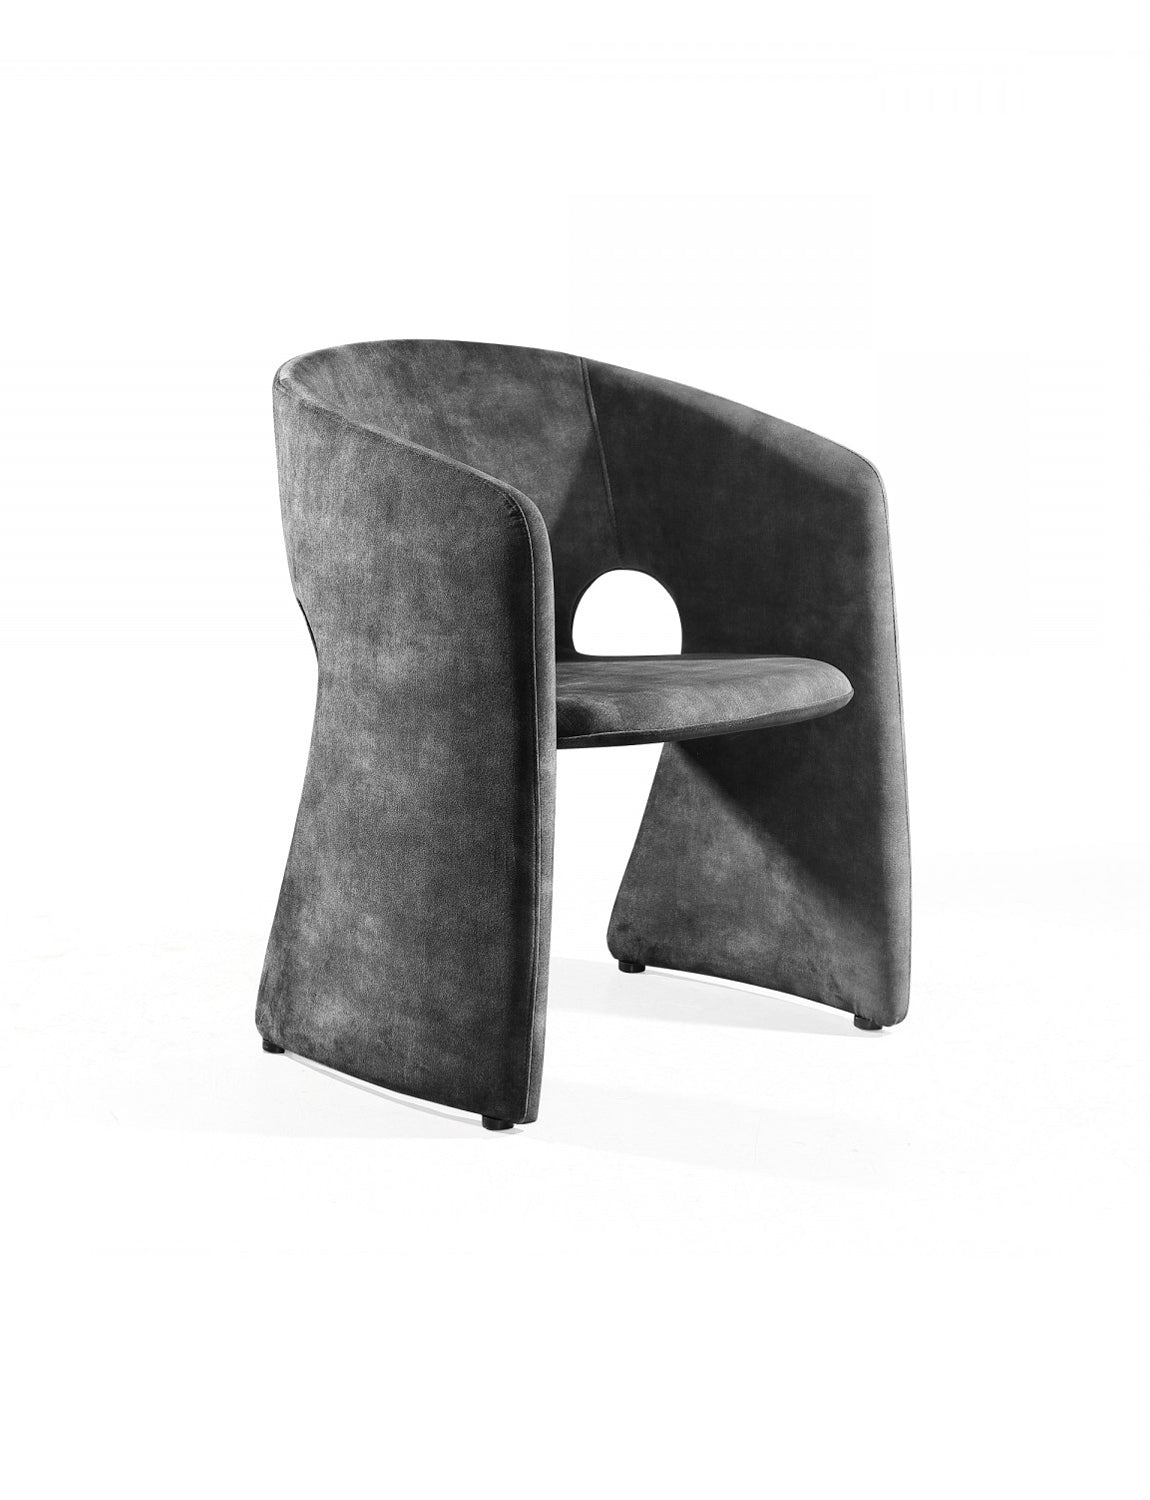 Raven Dining Chair